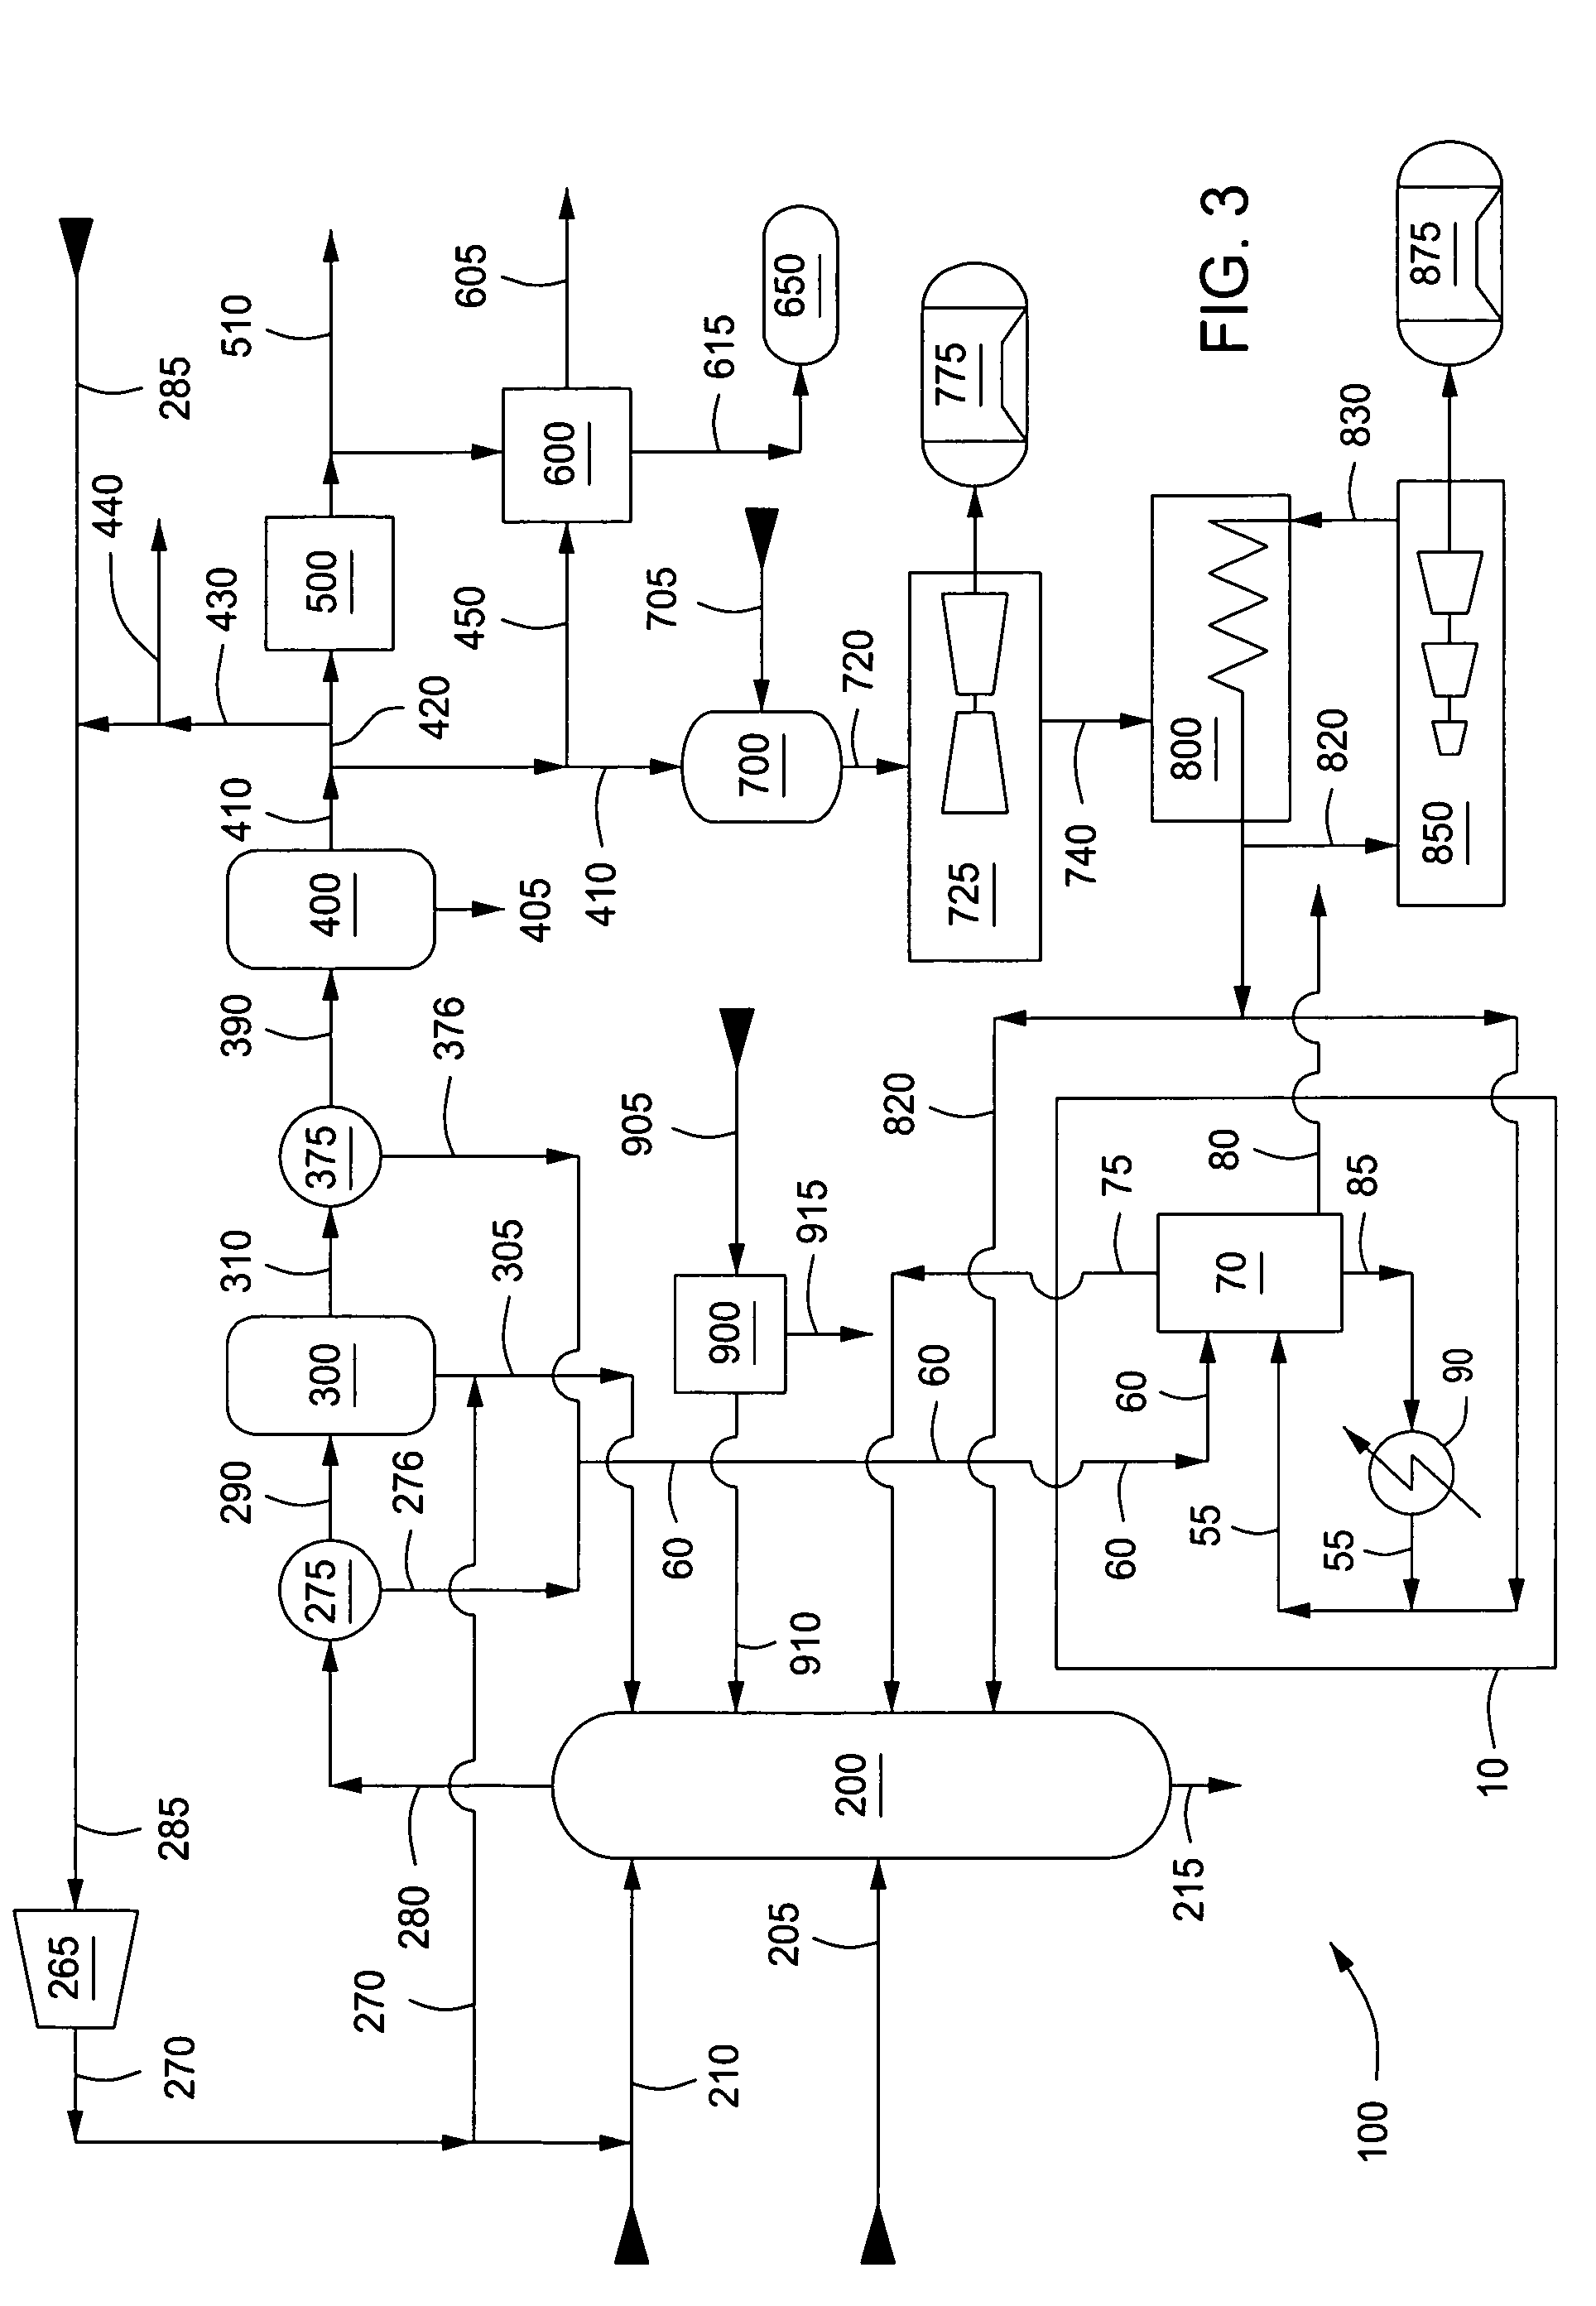 Method for treatment of process waters using steam